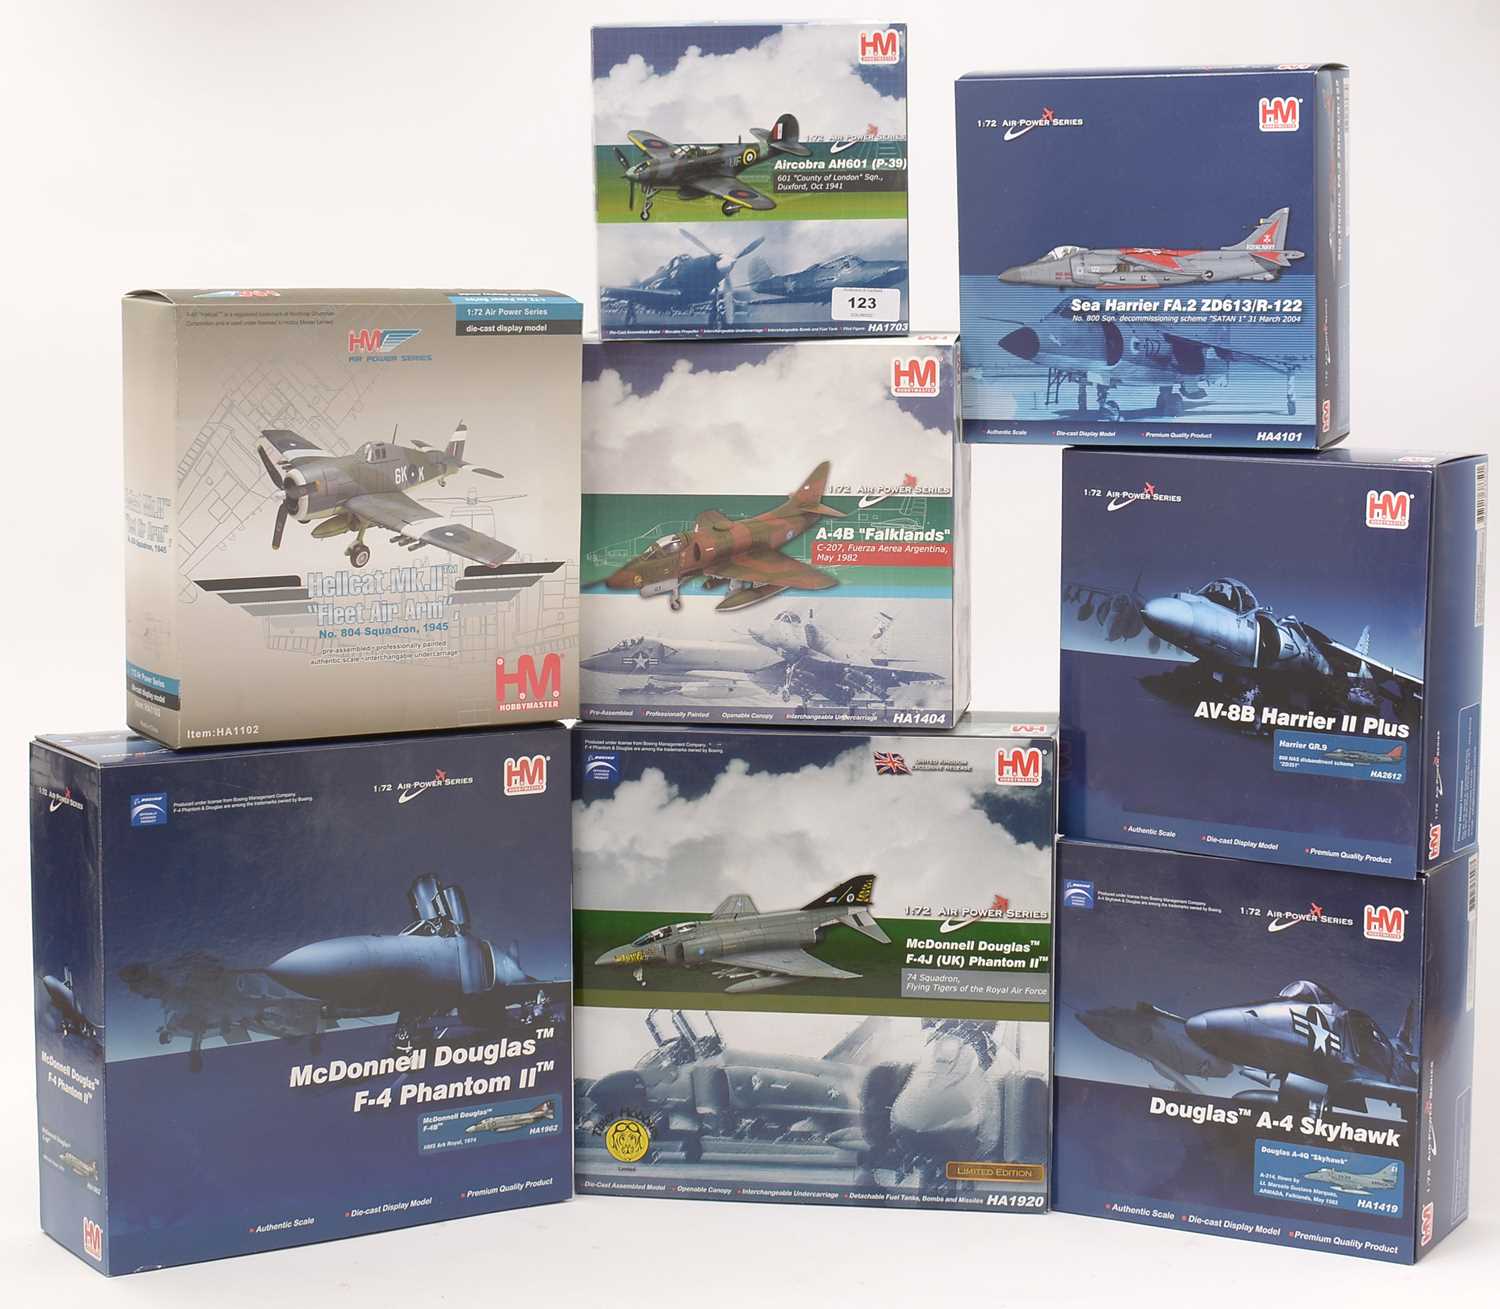 Lot 123 - Hobby Master 1:72 scale diecast aircraft